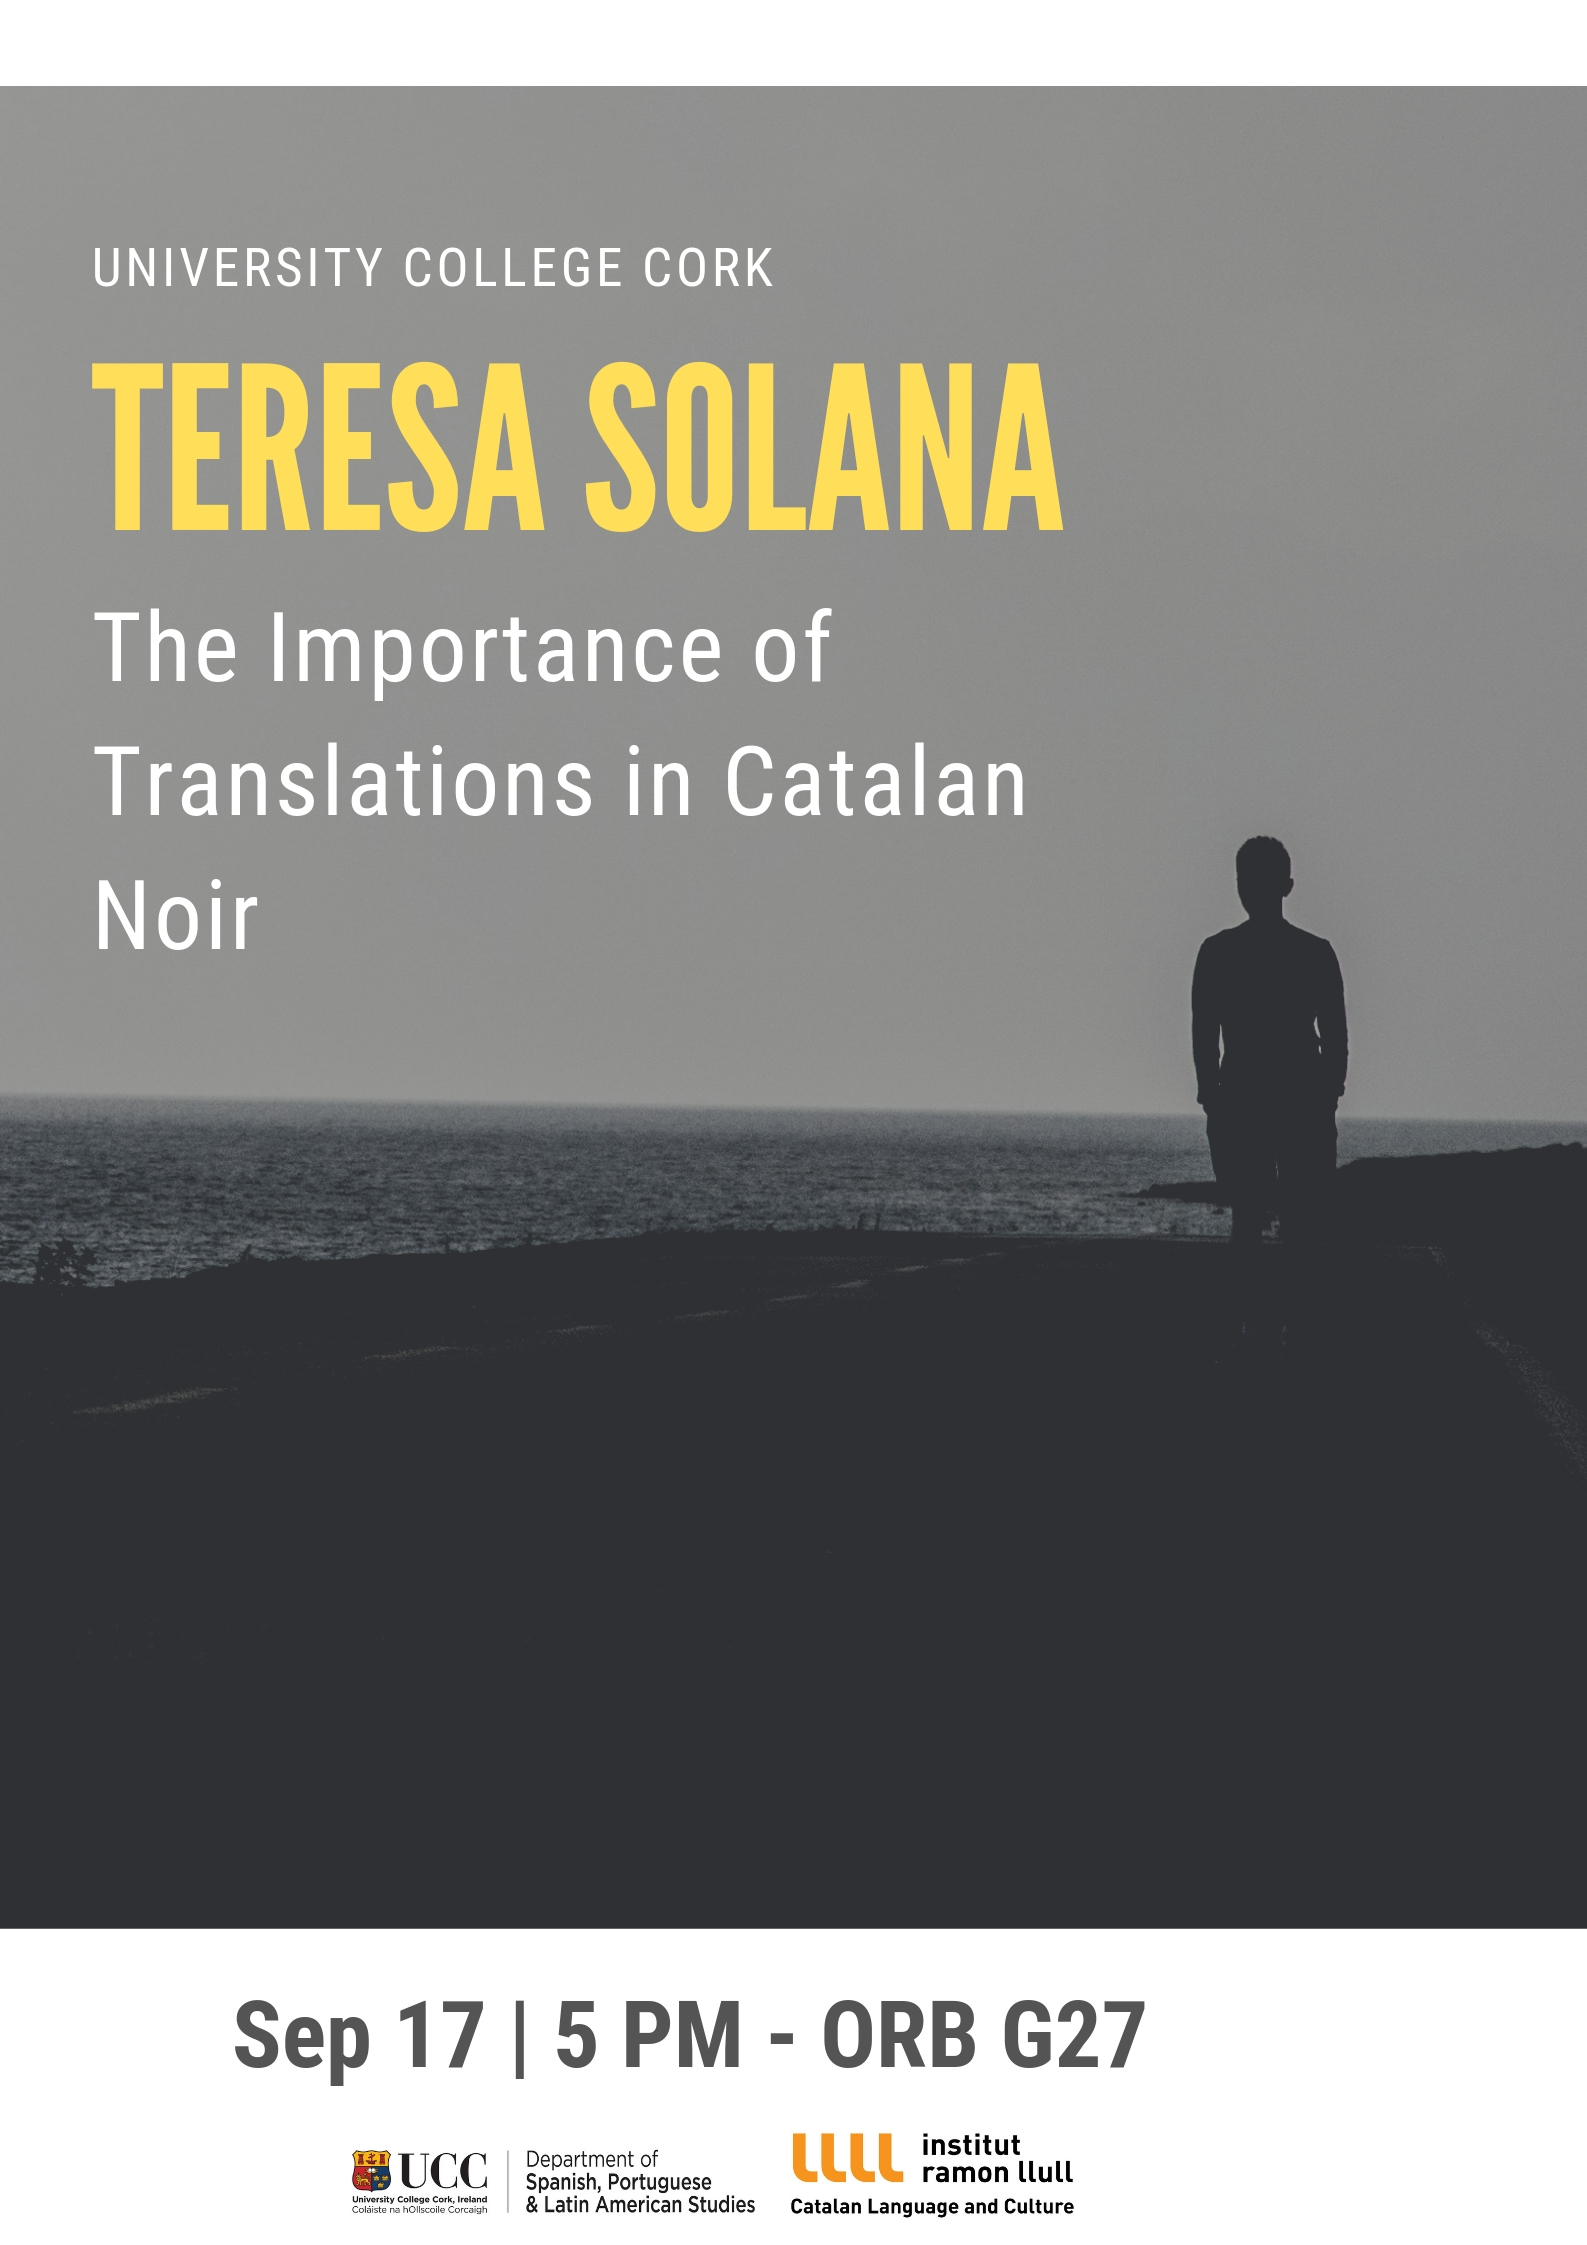 Teresa Solana in UCC on Sept. 17th: The Importance of Translations in Catalan Noir